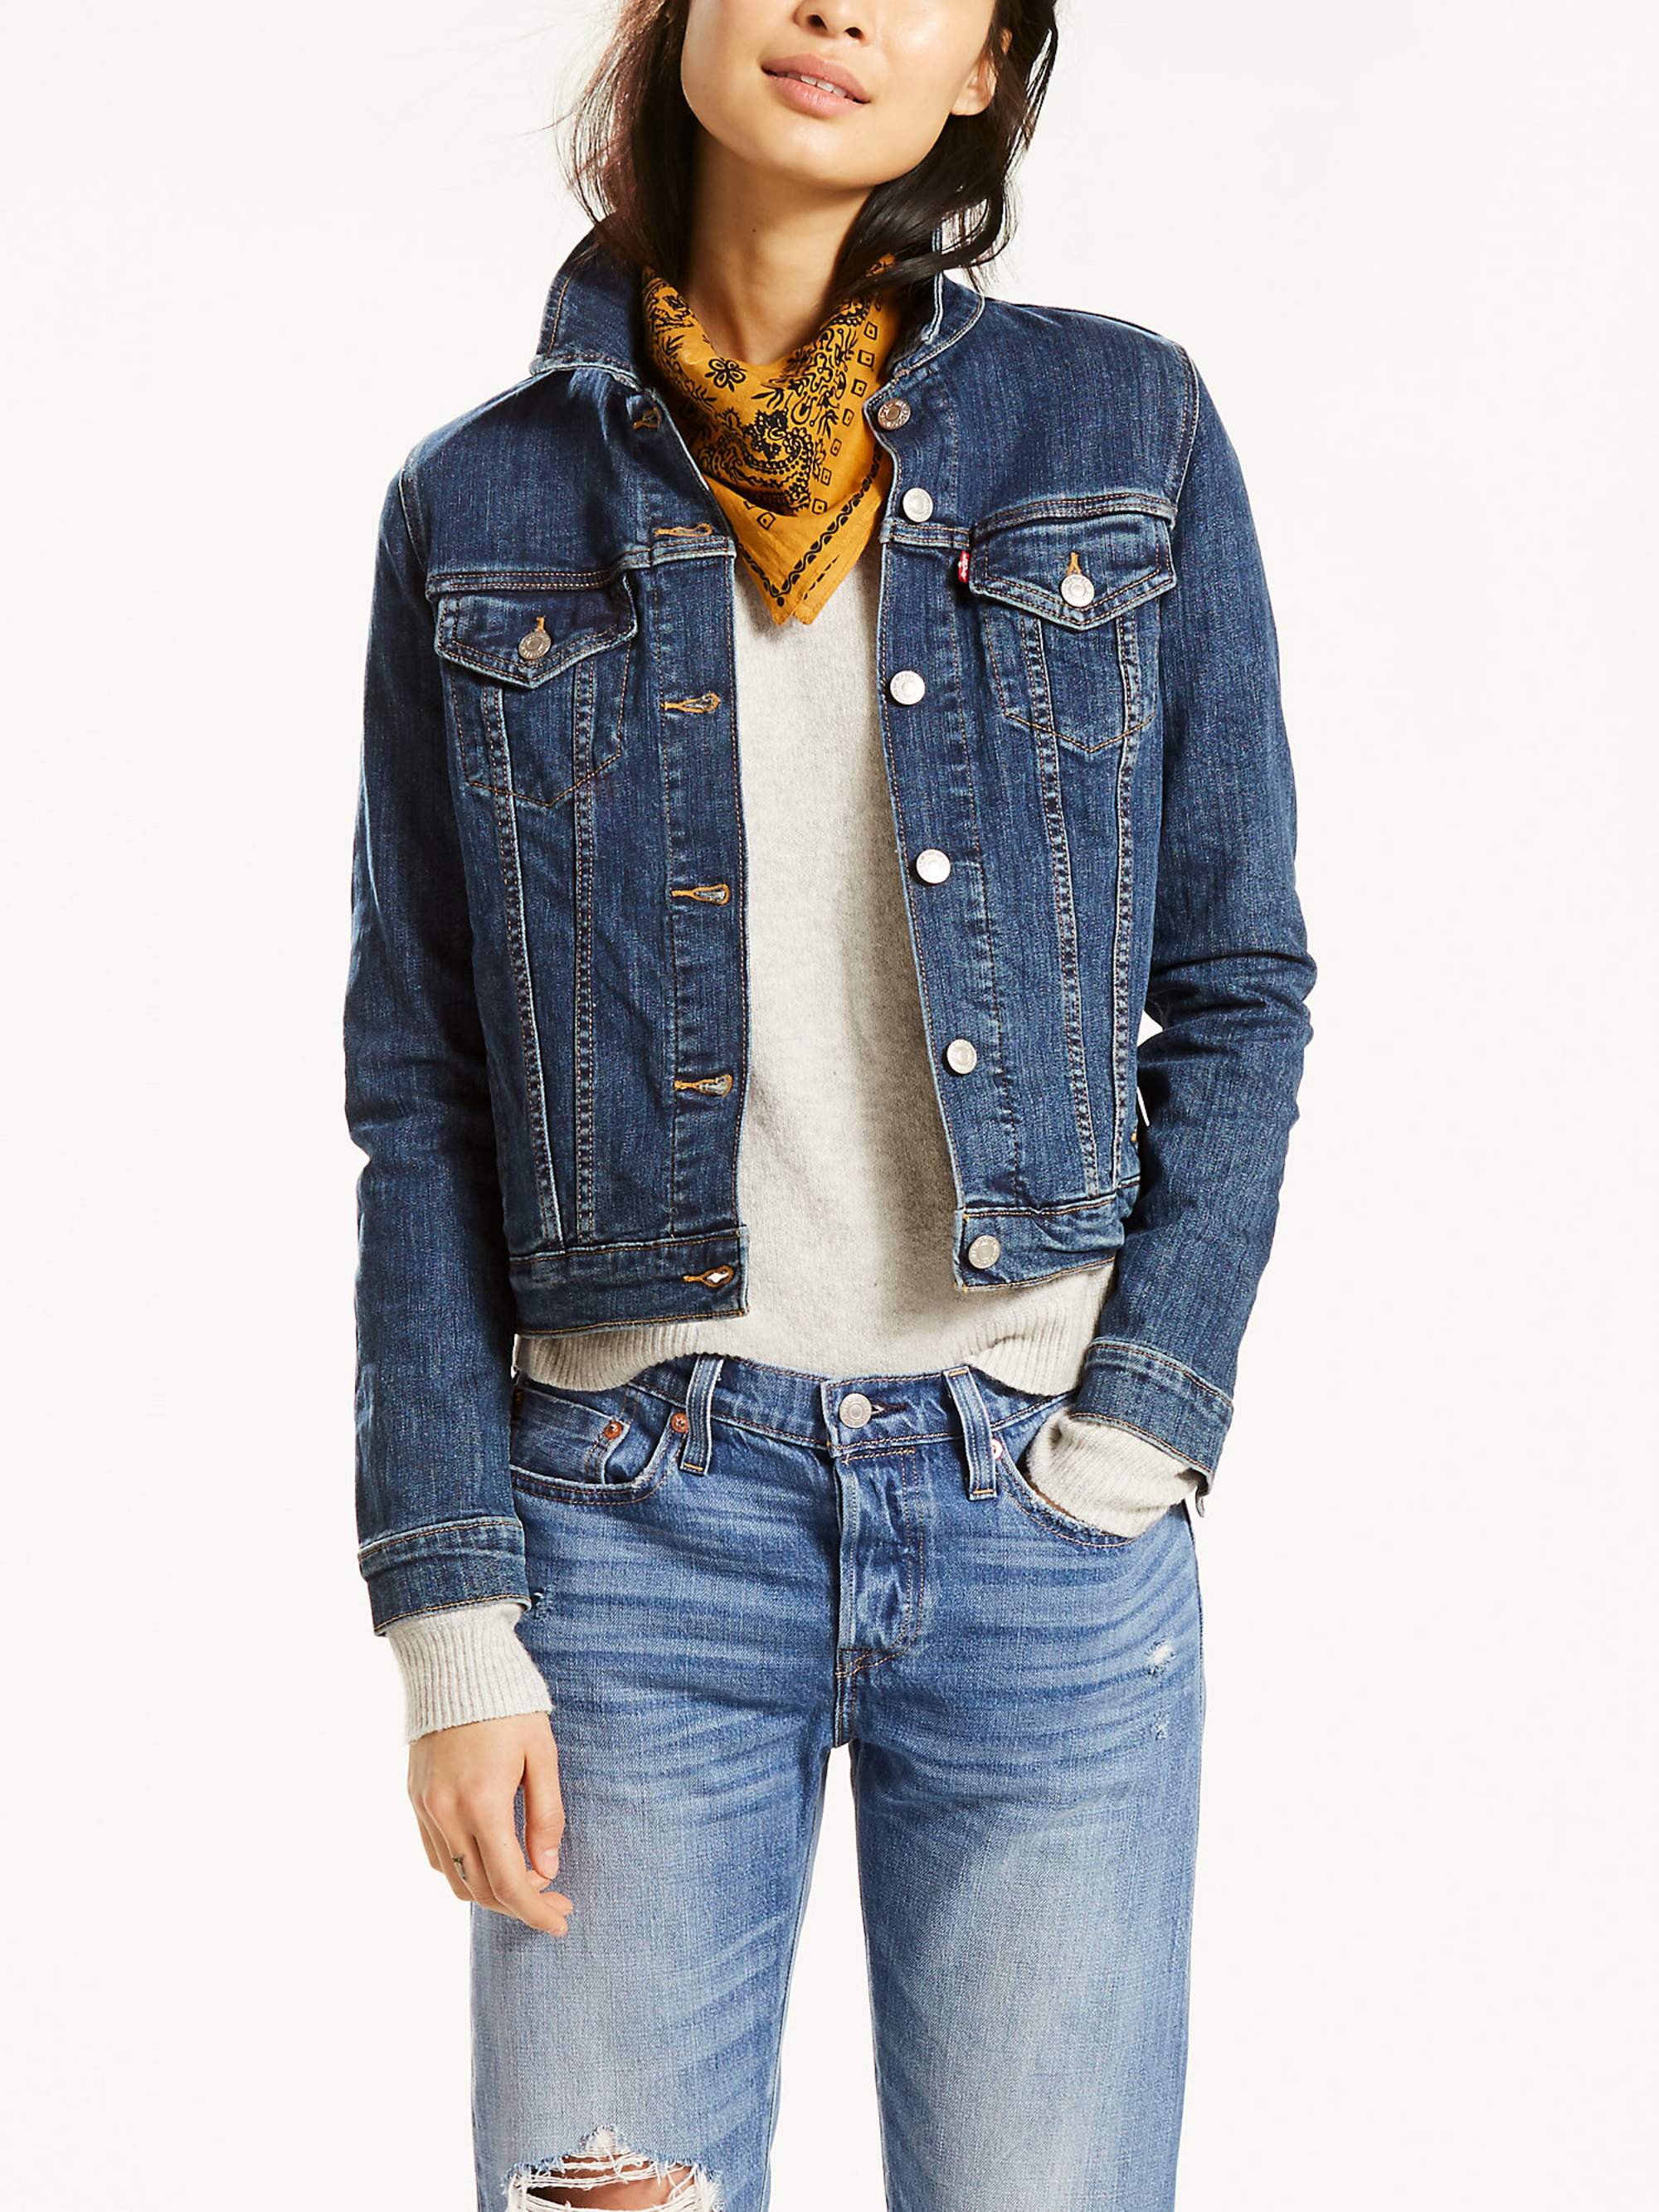 Look No Further, We Found The Jean Jacket You Need In Your Life This Summer